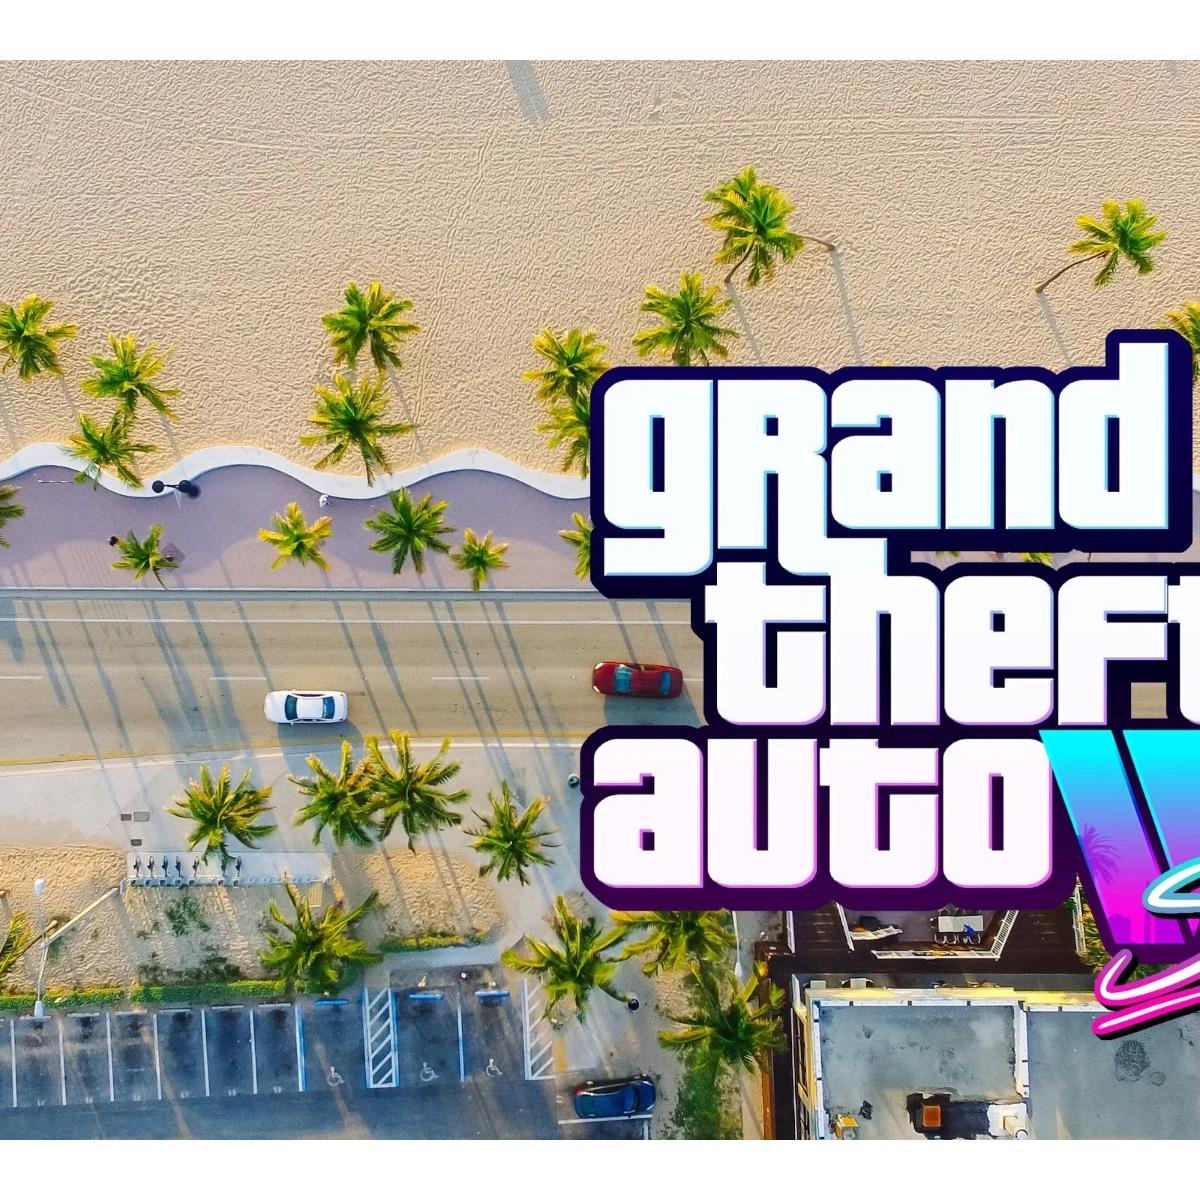 GTA 6 news: Could Rockstar Games launch free-to-play Grand Theft Auto?, Gaming, Entertainment